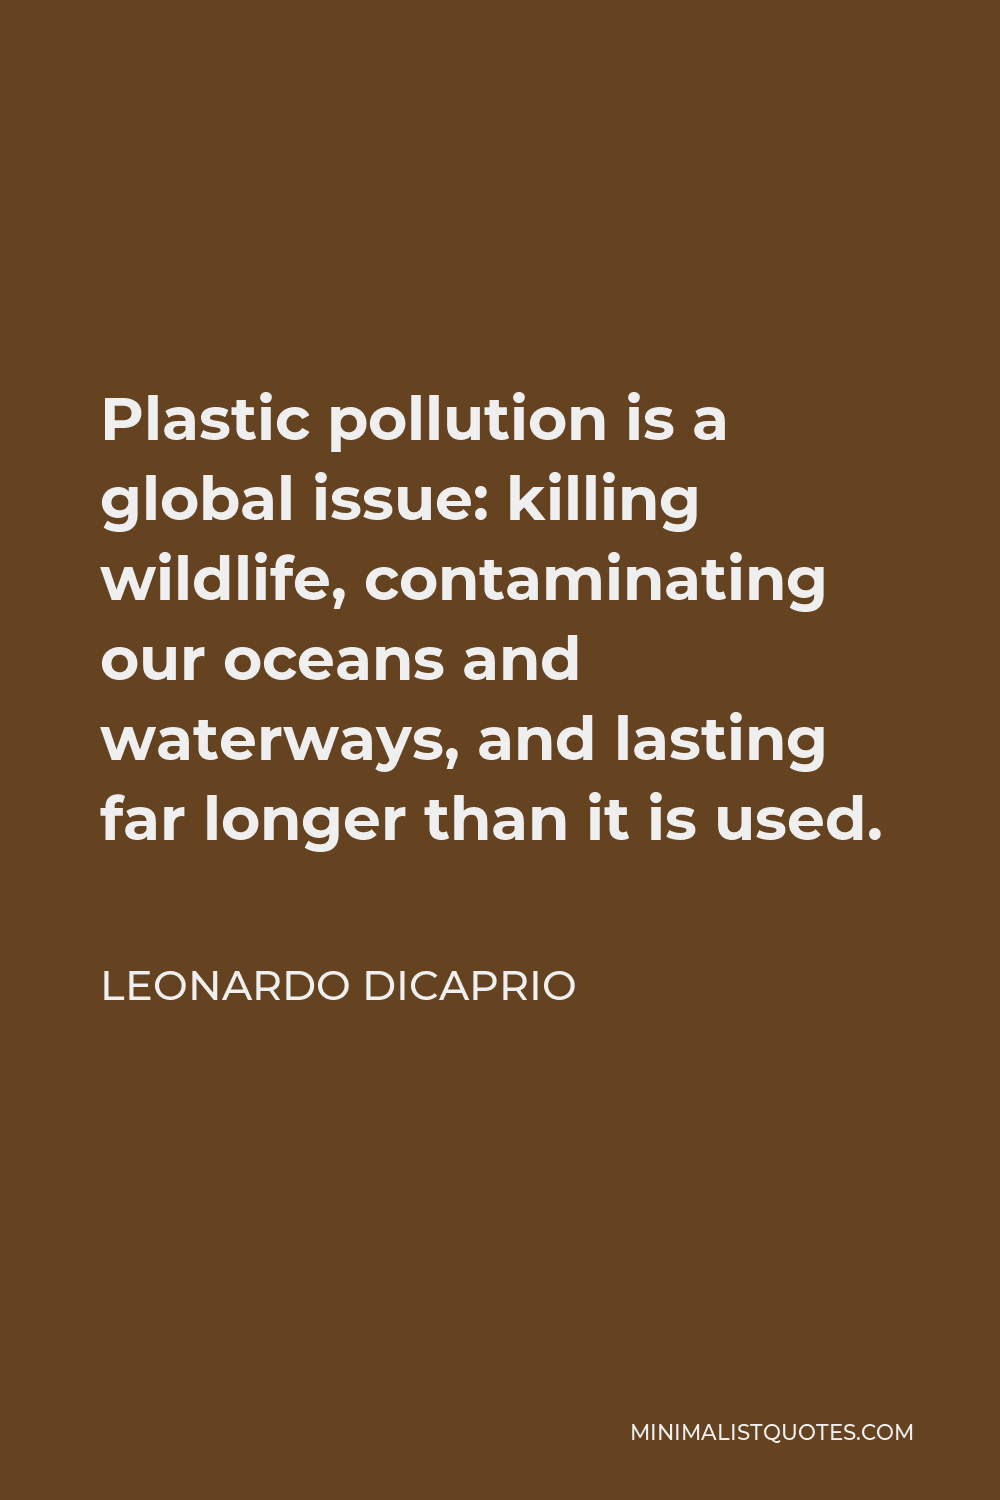 Leonardo DiCaprio Quote - Plastic pollution is a global issue: killing wildlife, contaminating our oceans and waterways, and lasting far longer than it is used.